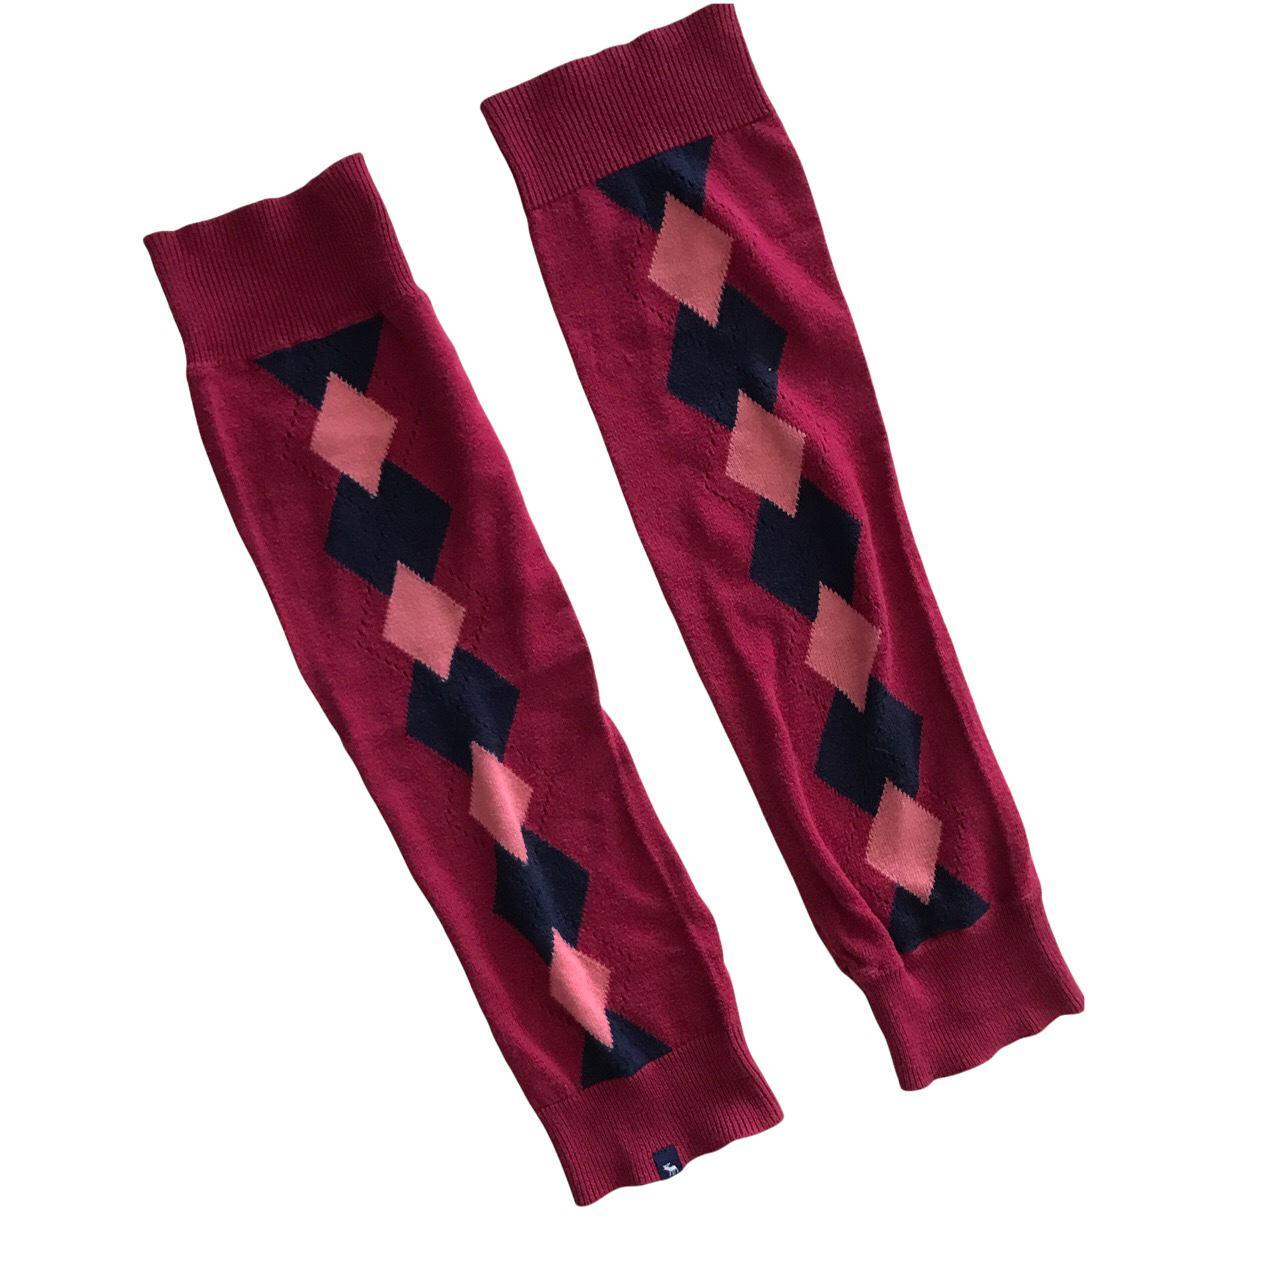 Product Image 3 - Abercrombie and Fitch leg warmers
Dark